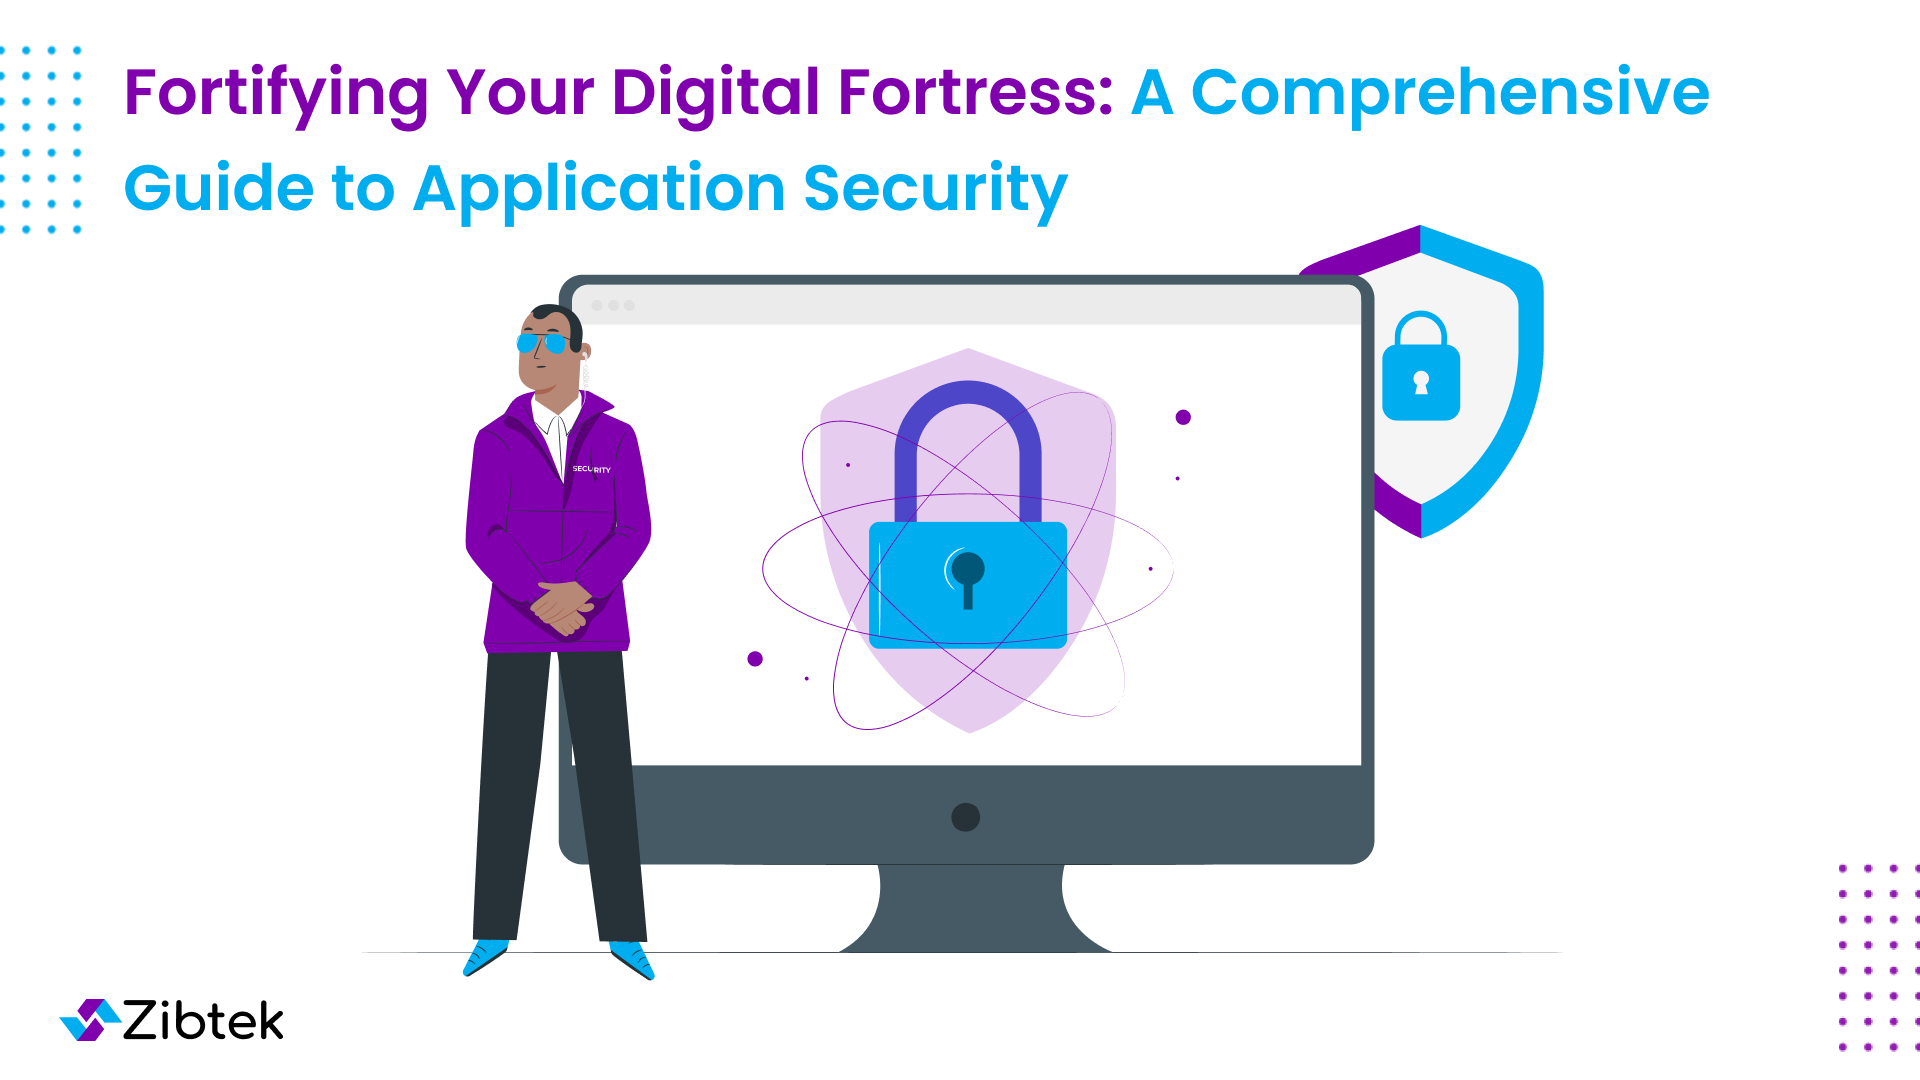 Fortifying Your Digital Fortress: A Comprehensive Guide to Application Security